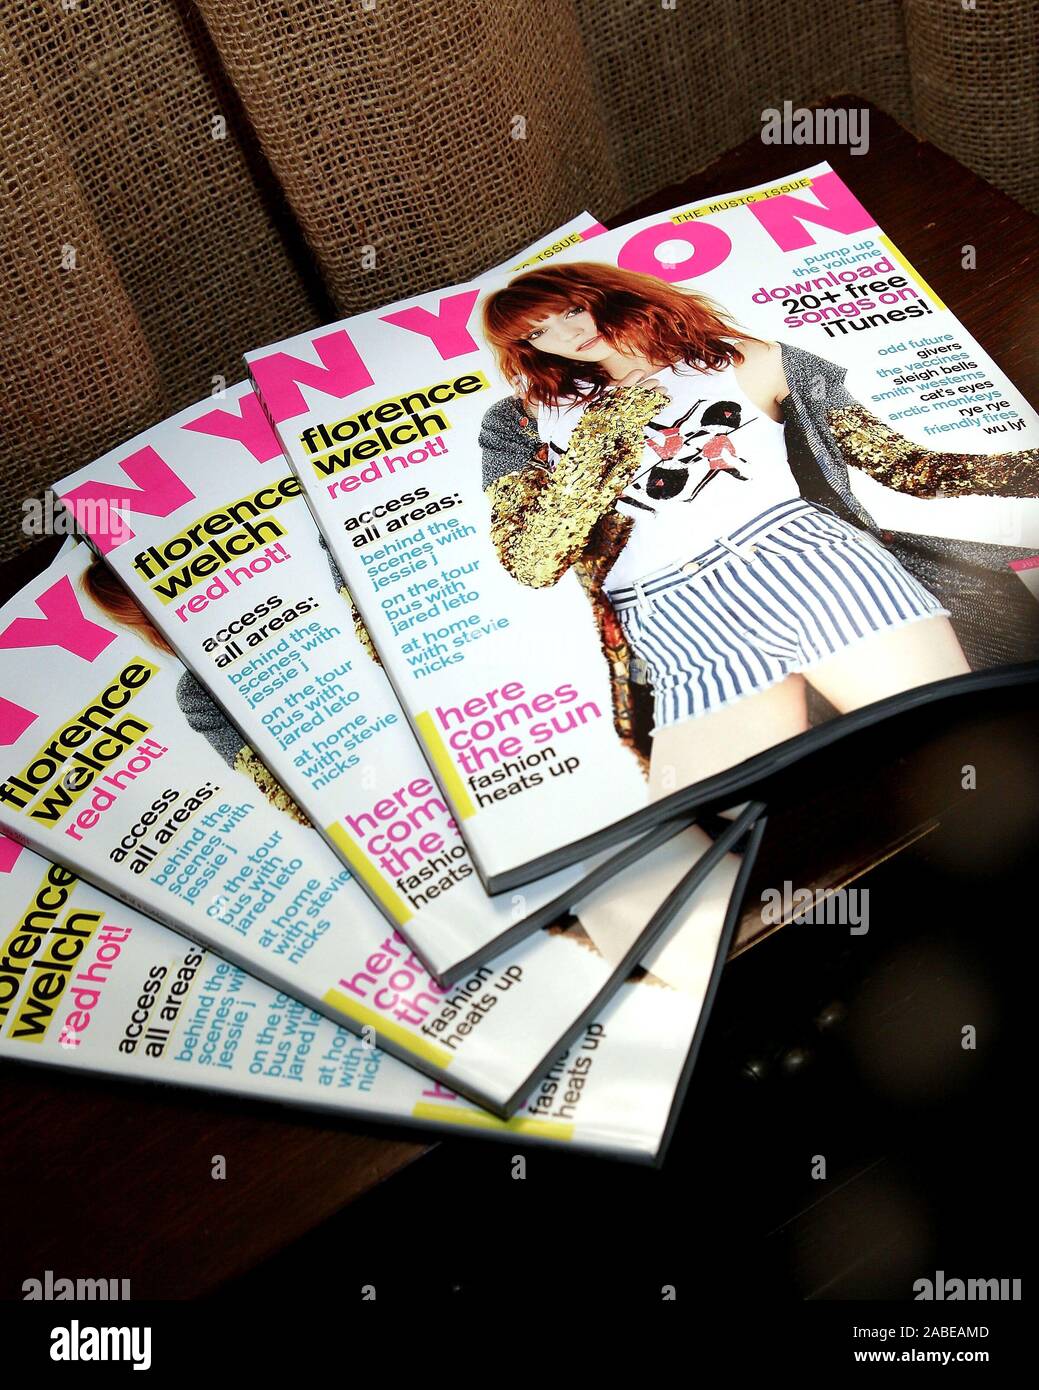 New York, NY, USA. 21 June, 2011. Atmosphere, magazine cover at the 2011 Nylon Music Issue Launch Party. Credit: Steve Mack/Alamy Stock Photo